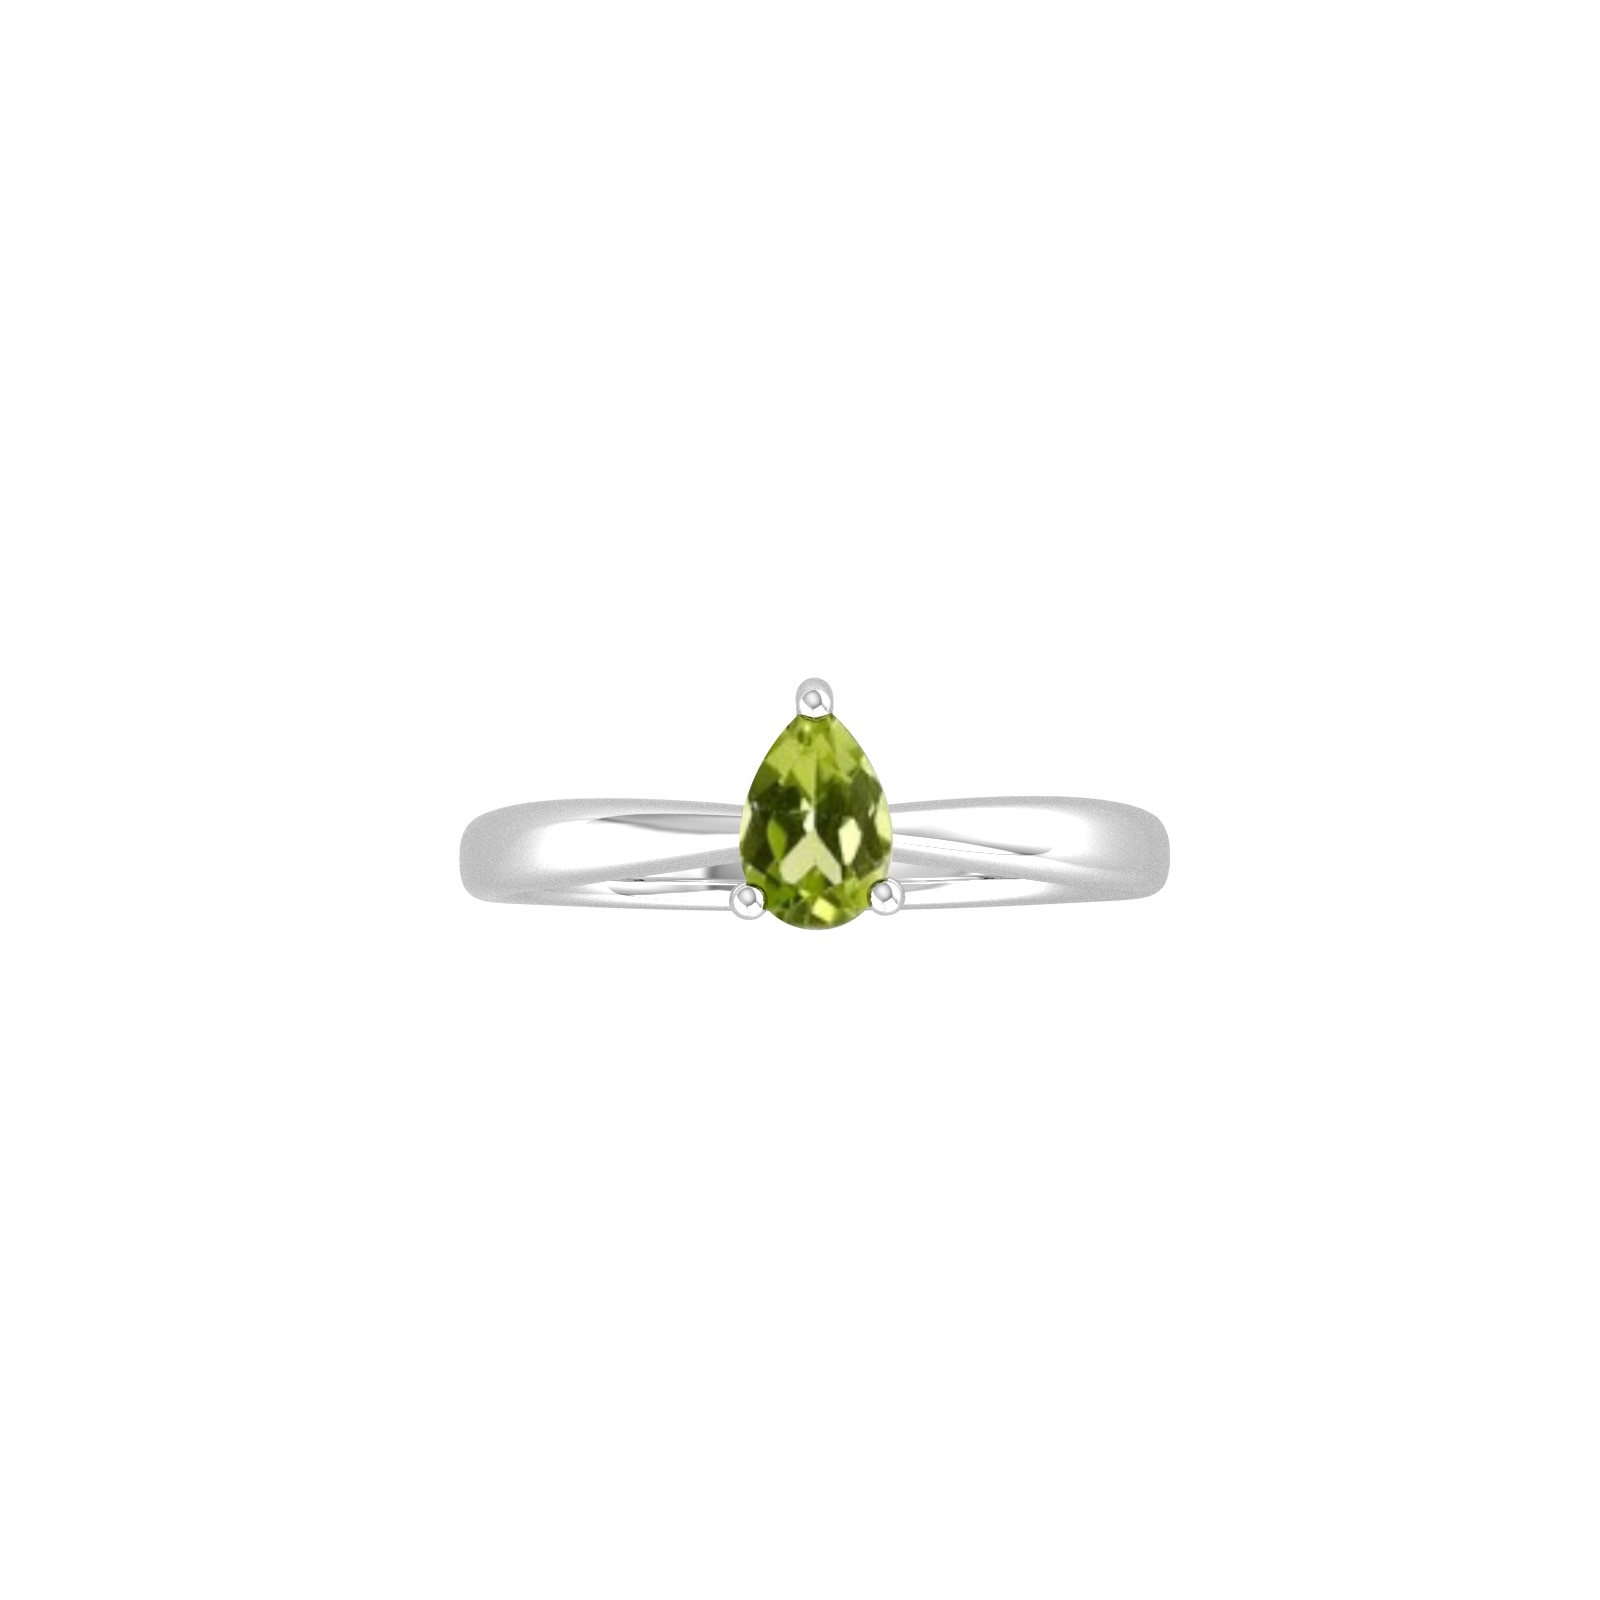 9ct White Gold 4 Claw Pear Cut Peridot Ring